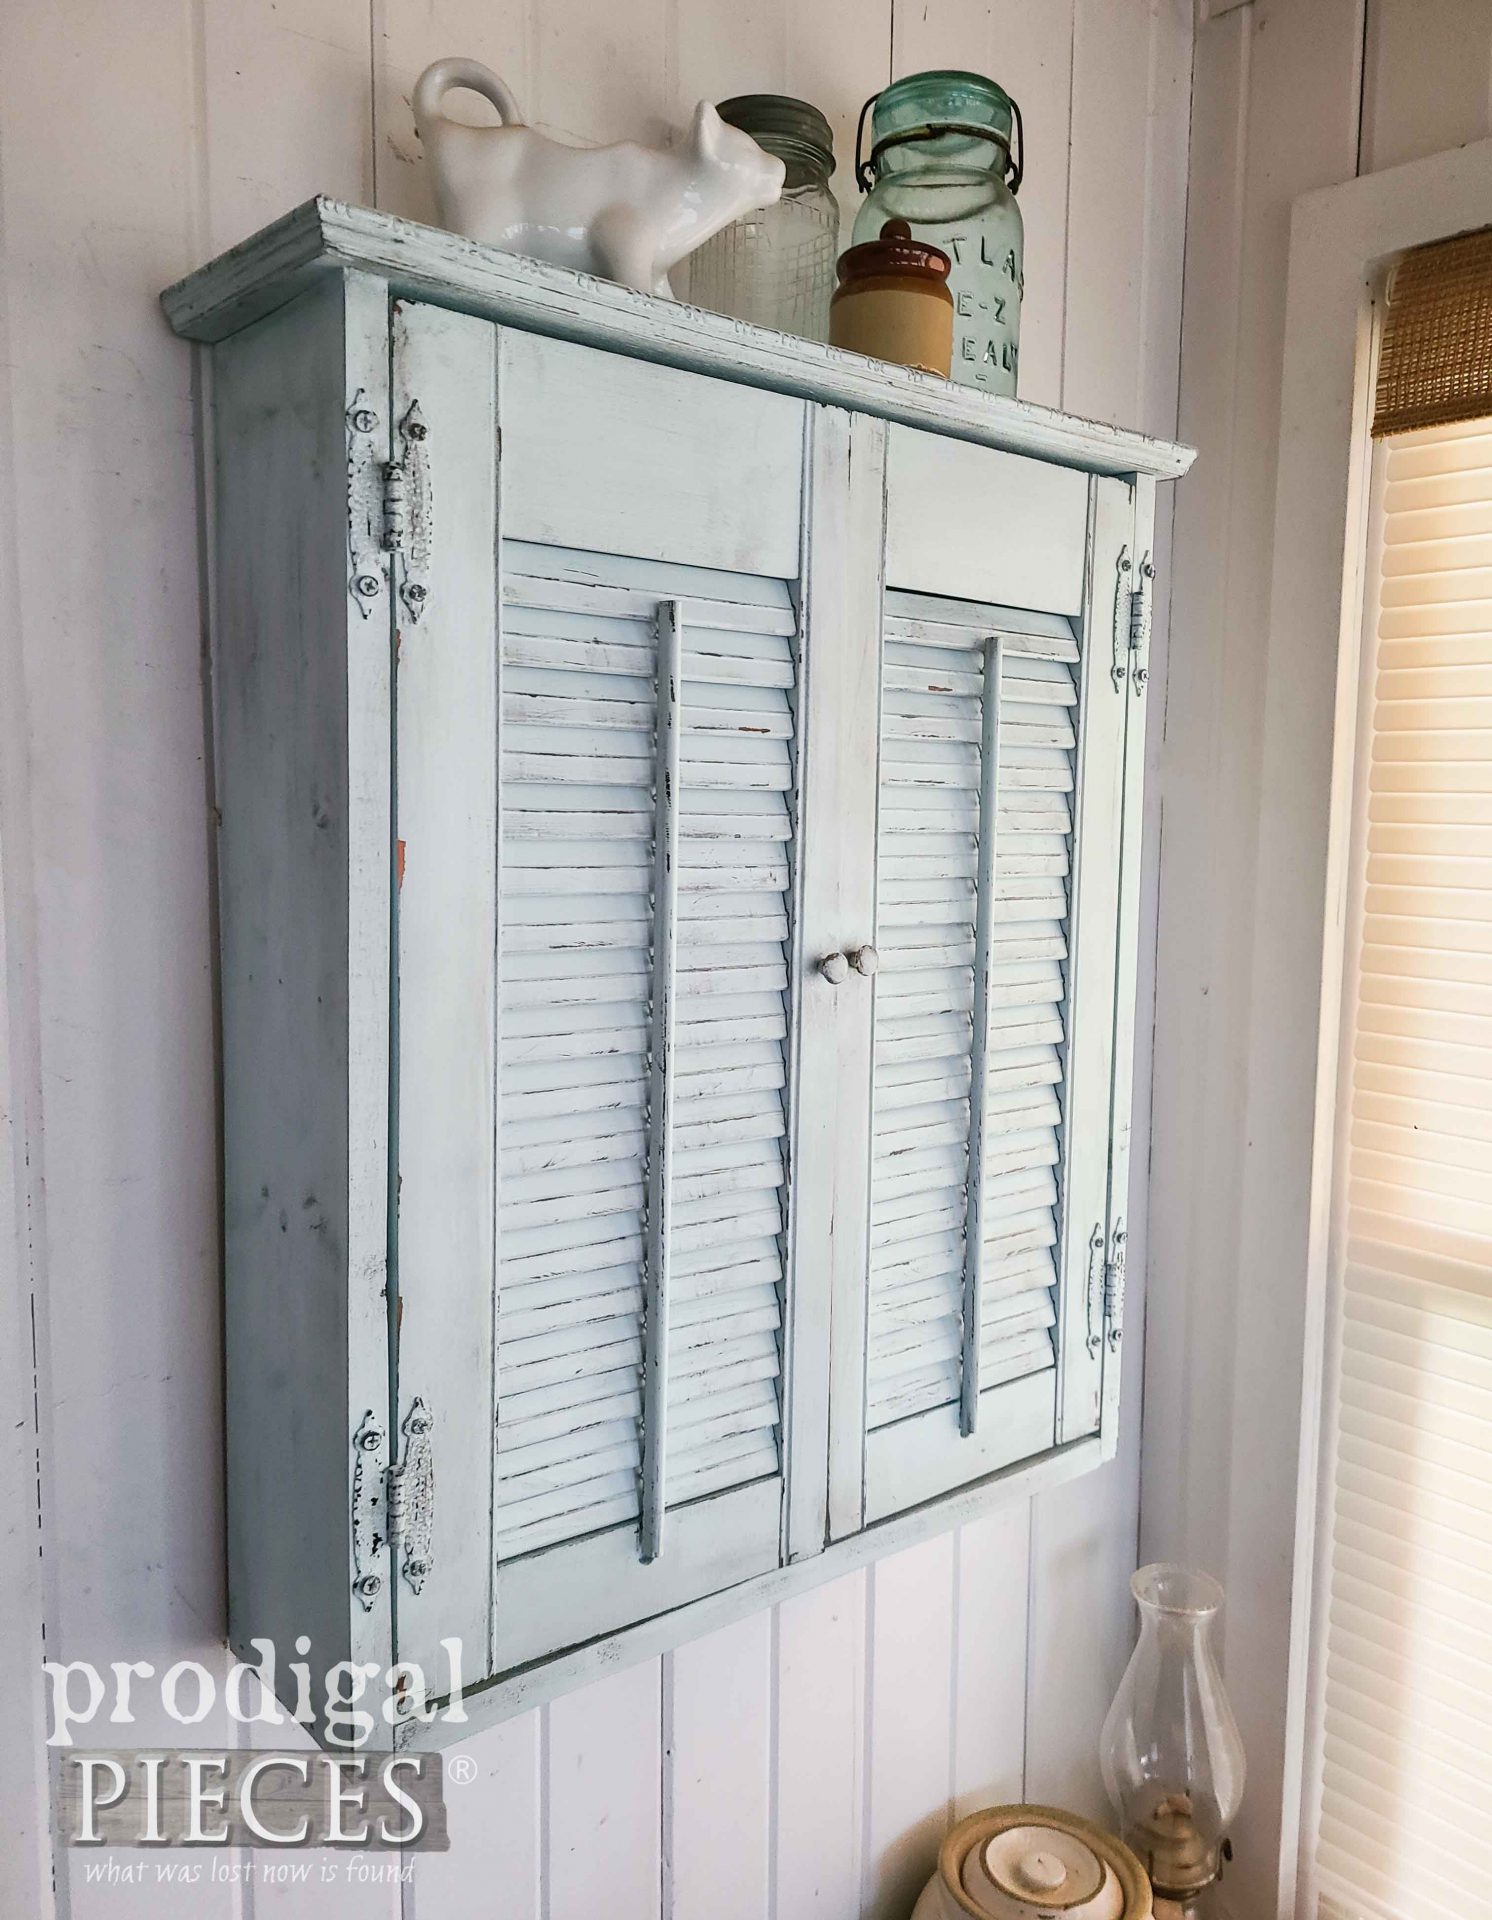 Handmade Shutters Wall Cabinet in Aqua Blue by Larissa of Prodigal Pieces | prodigalpieces.com #prodigalpieces #diy #woodworking #home #diy